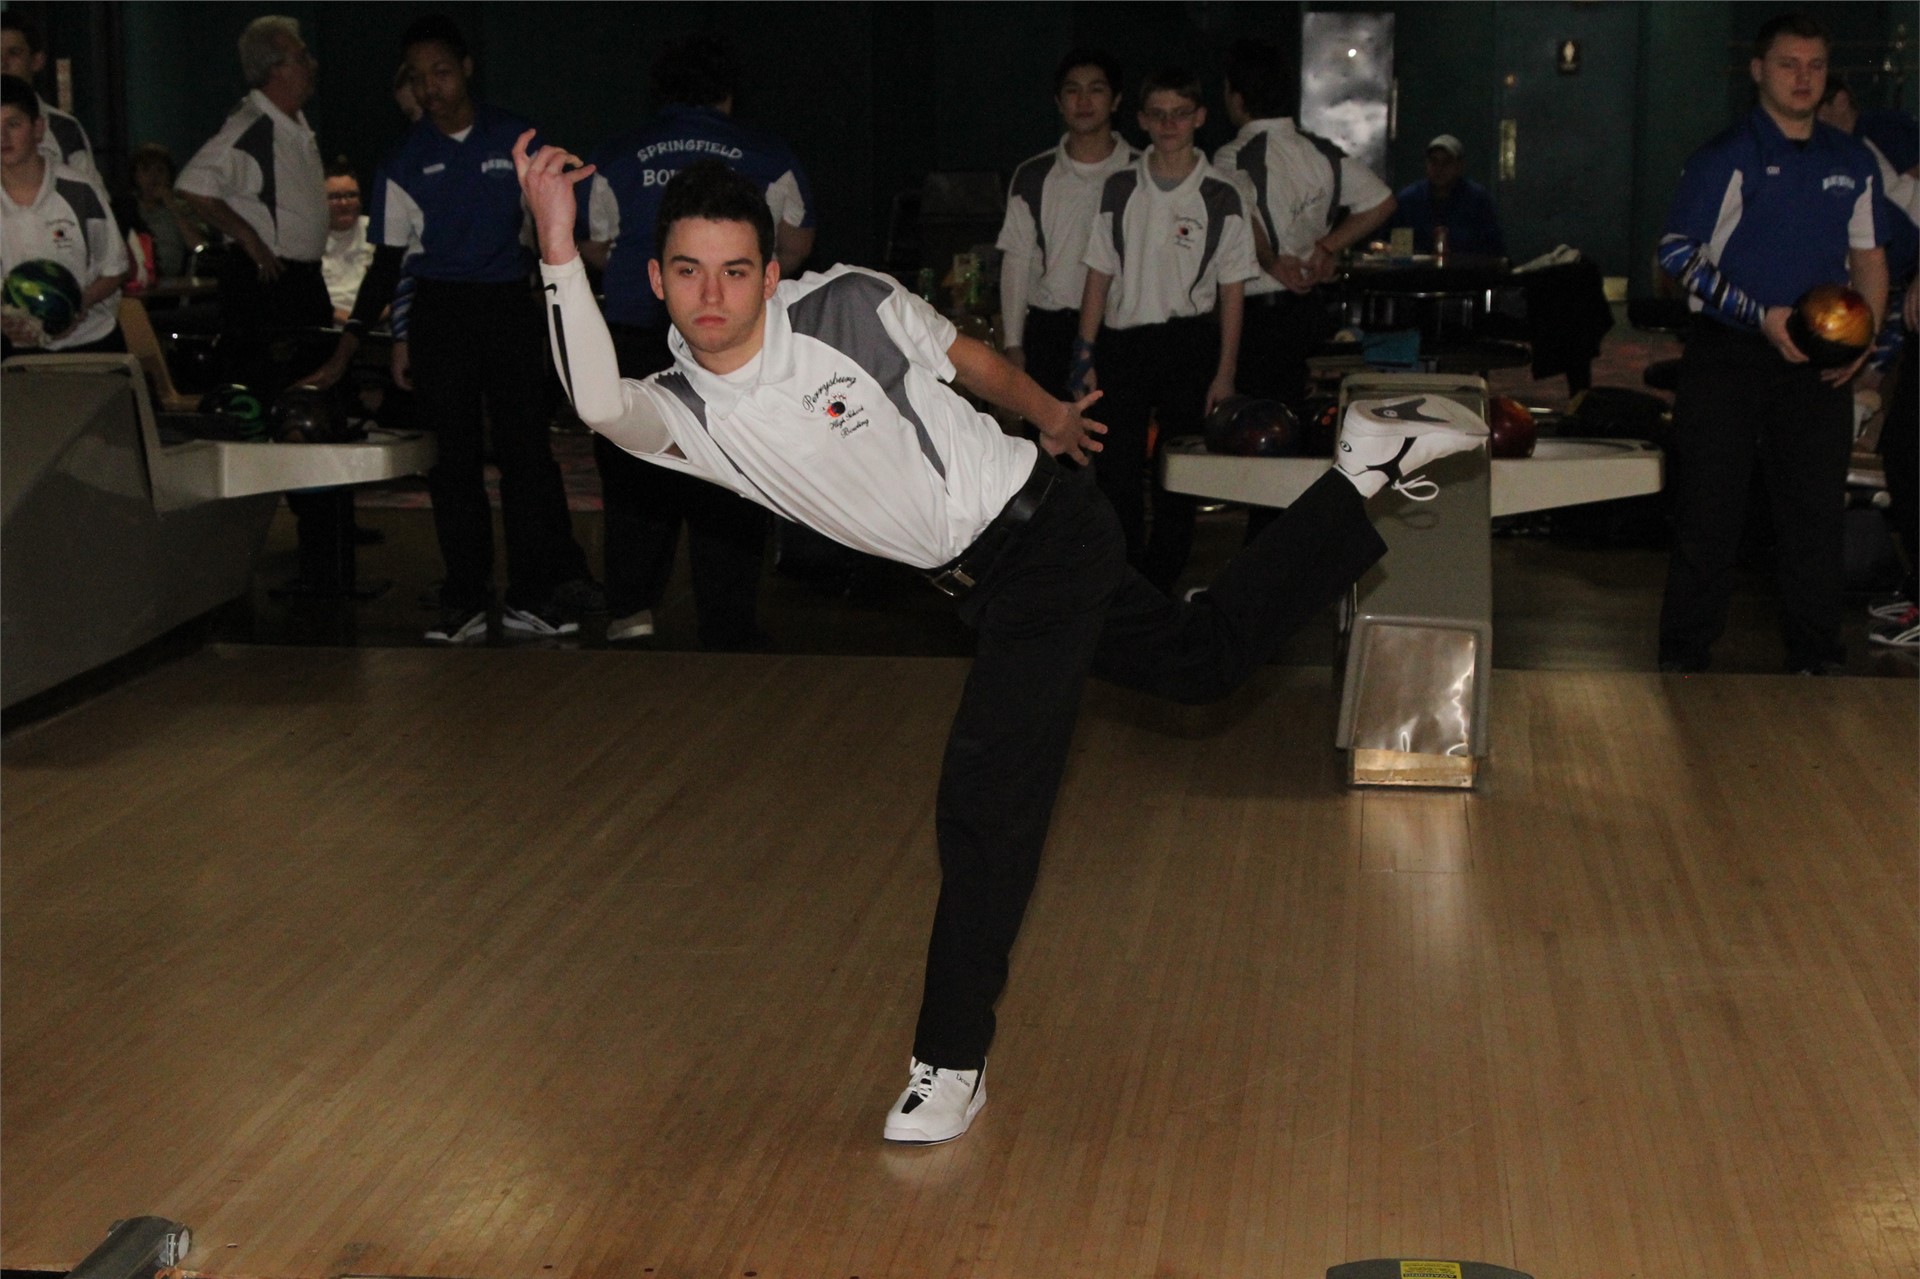 PHS student athlete bowling at a competition